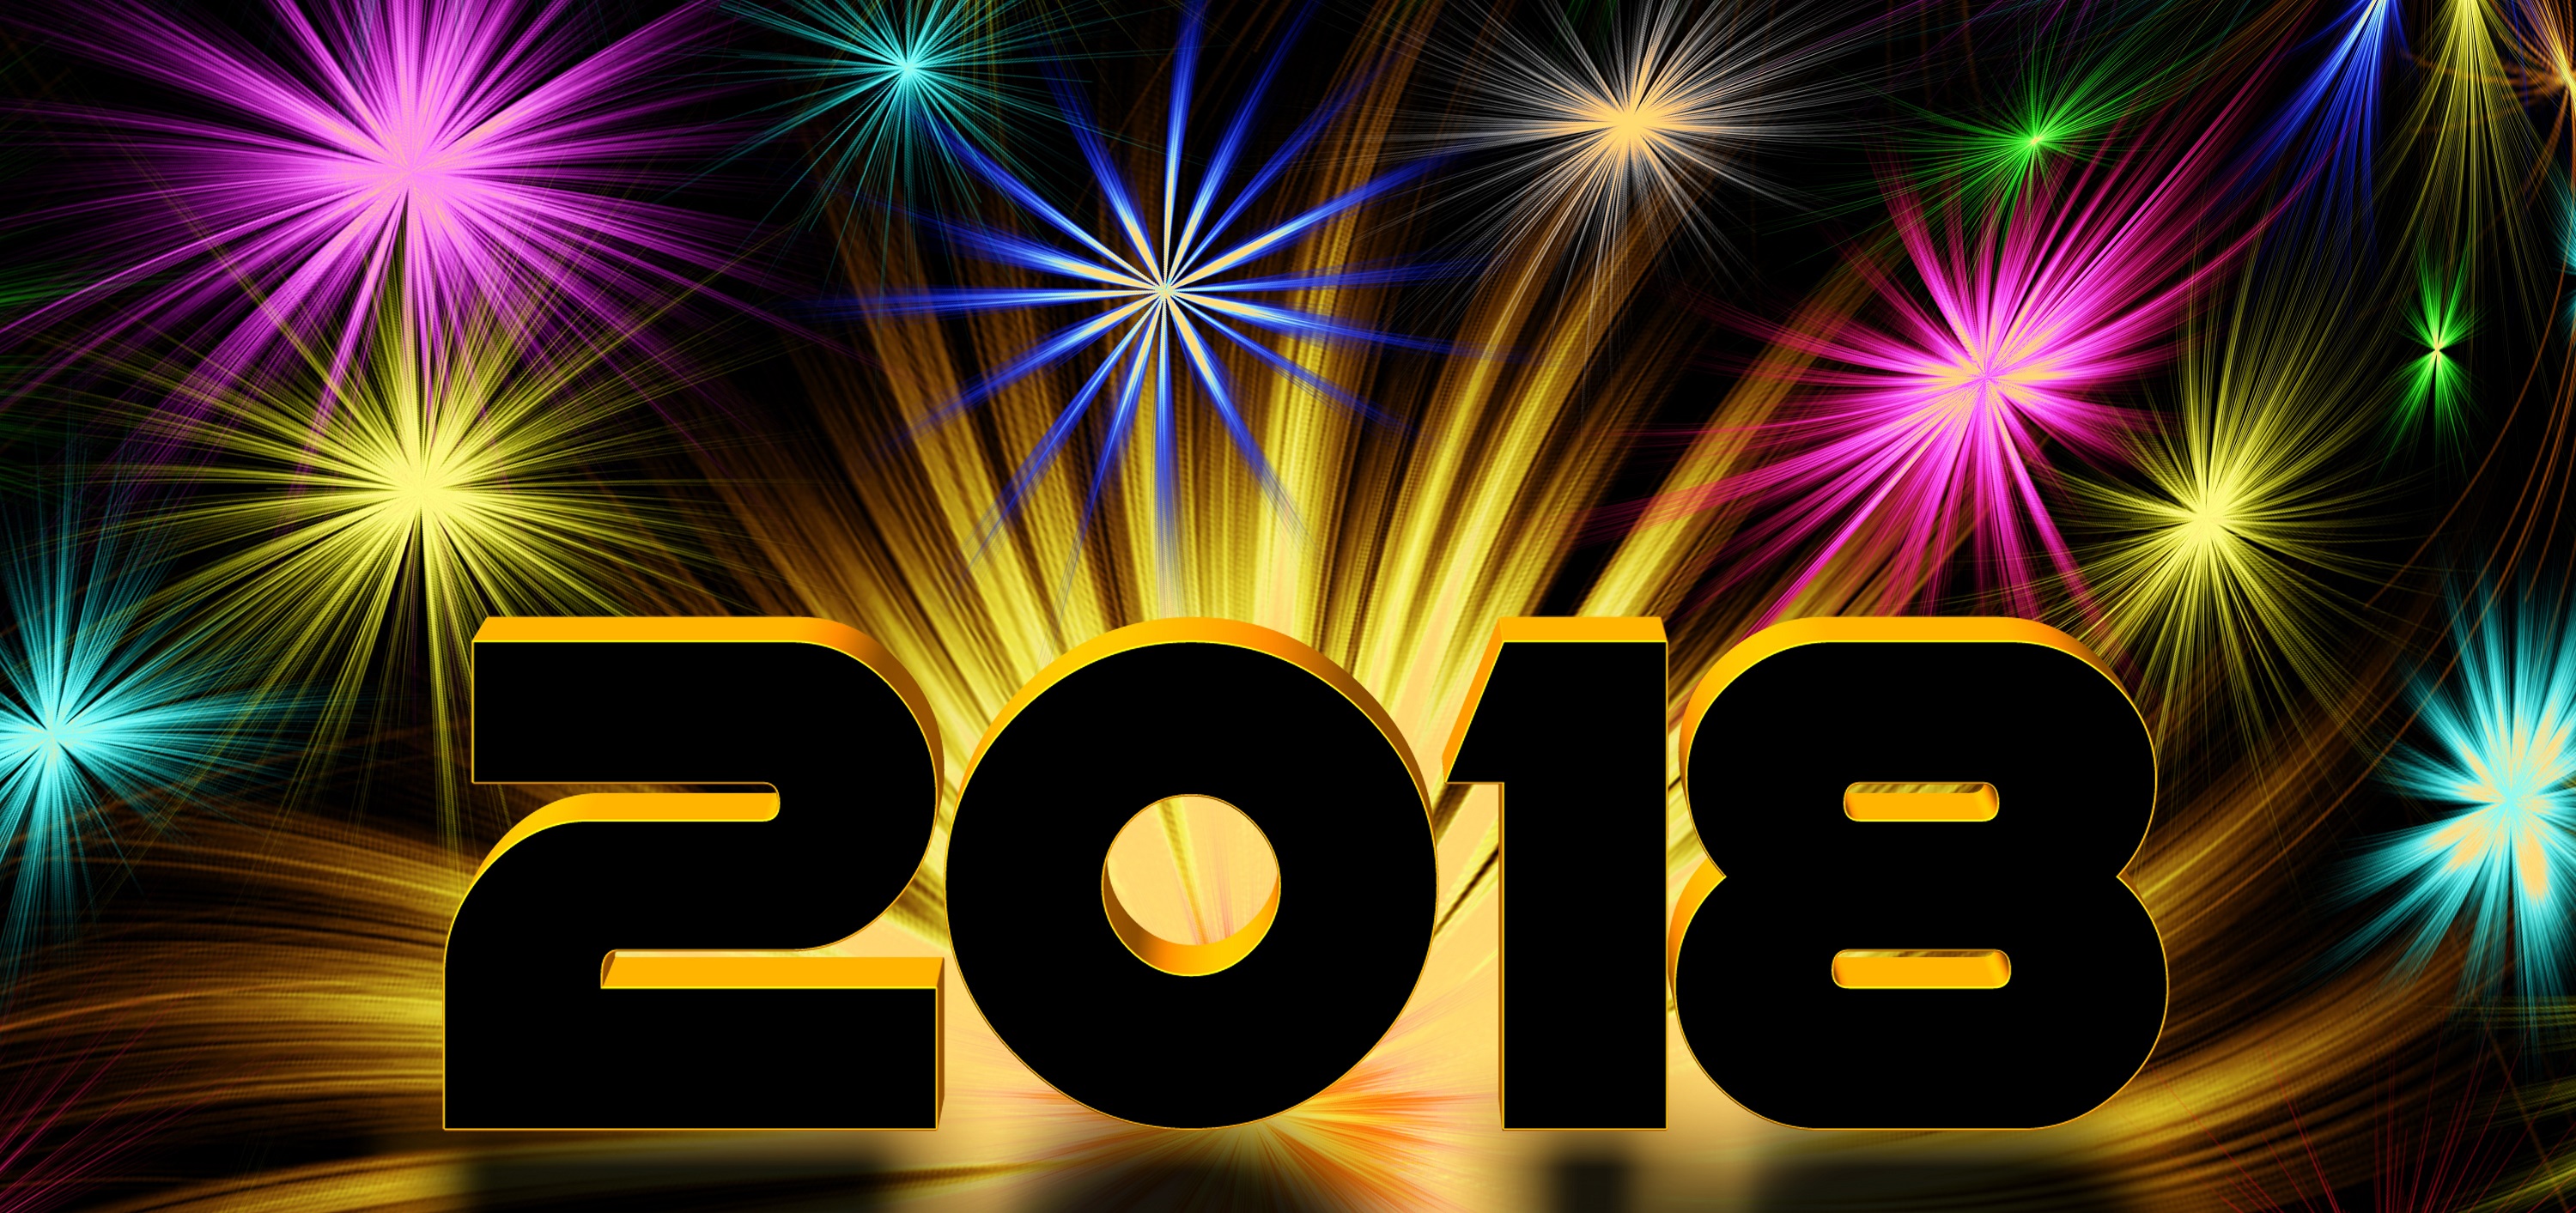 Colourful New Year Wallpaper Full HD Bakgrund And